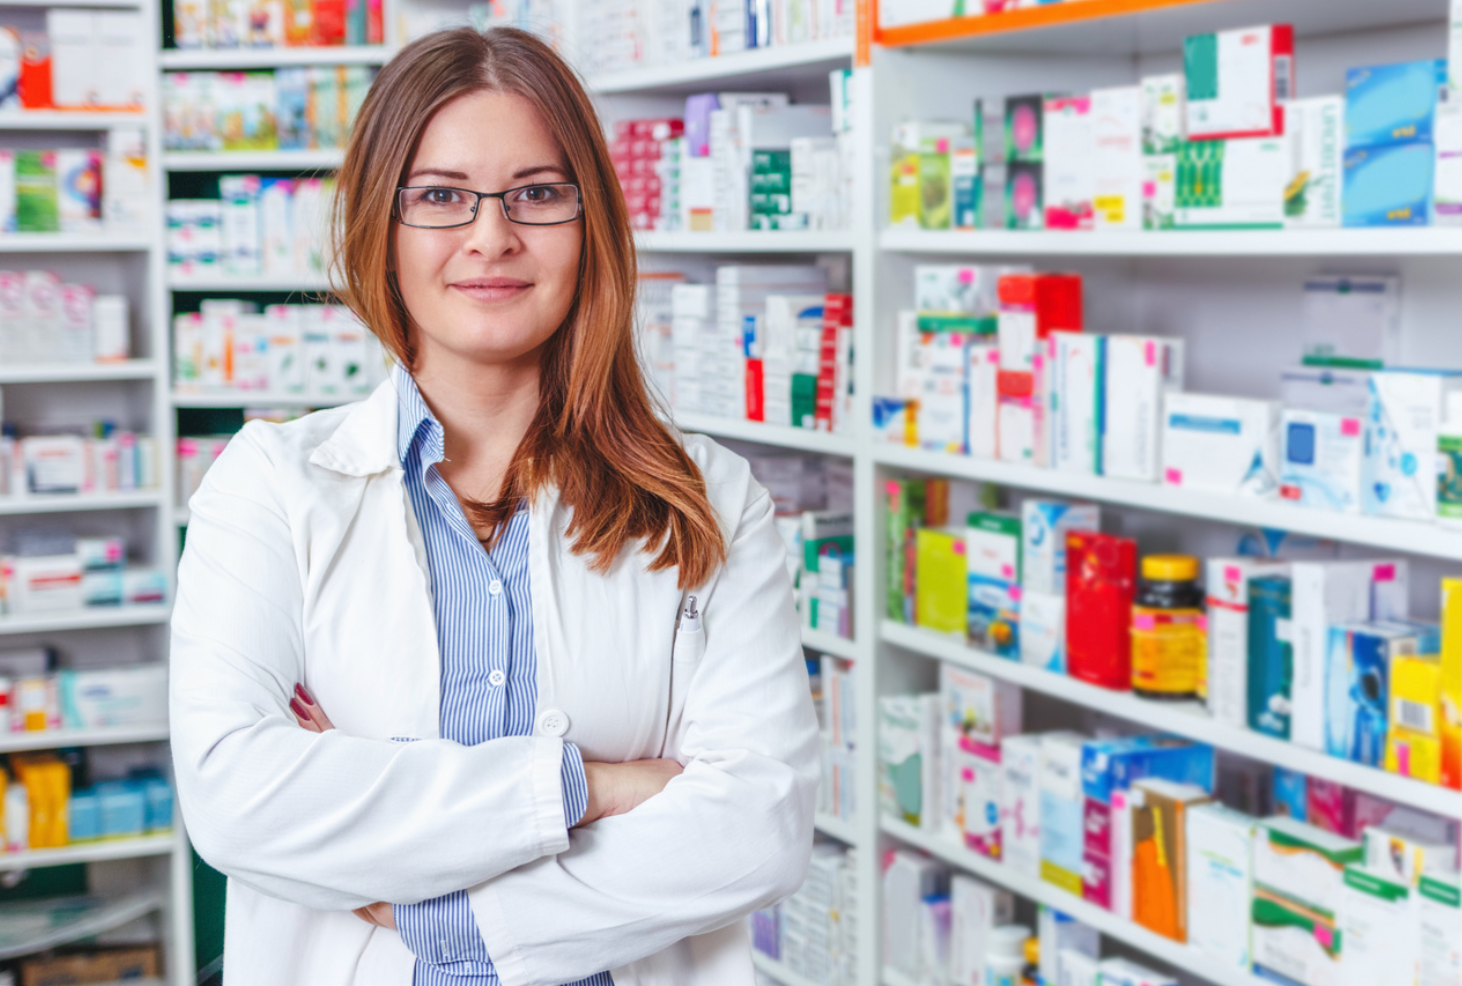 Women in Pharmacy Should Be Intentional in Defining Their Own Identity